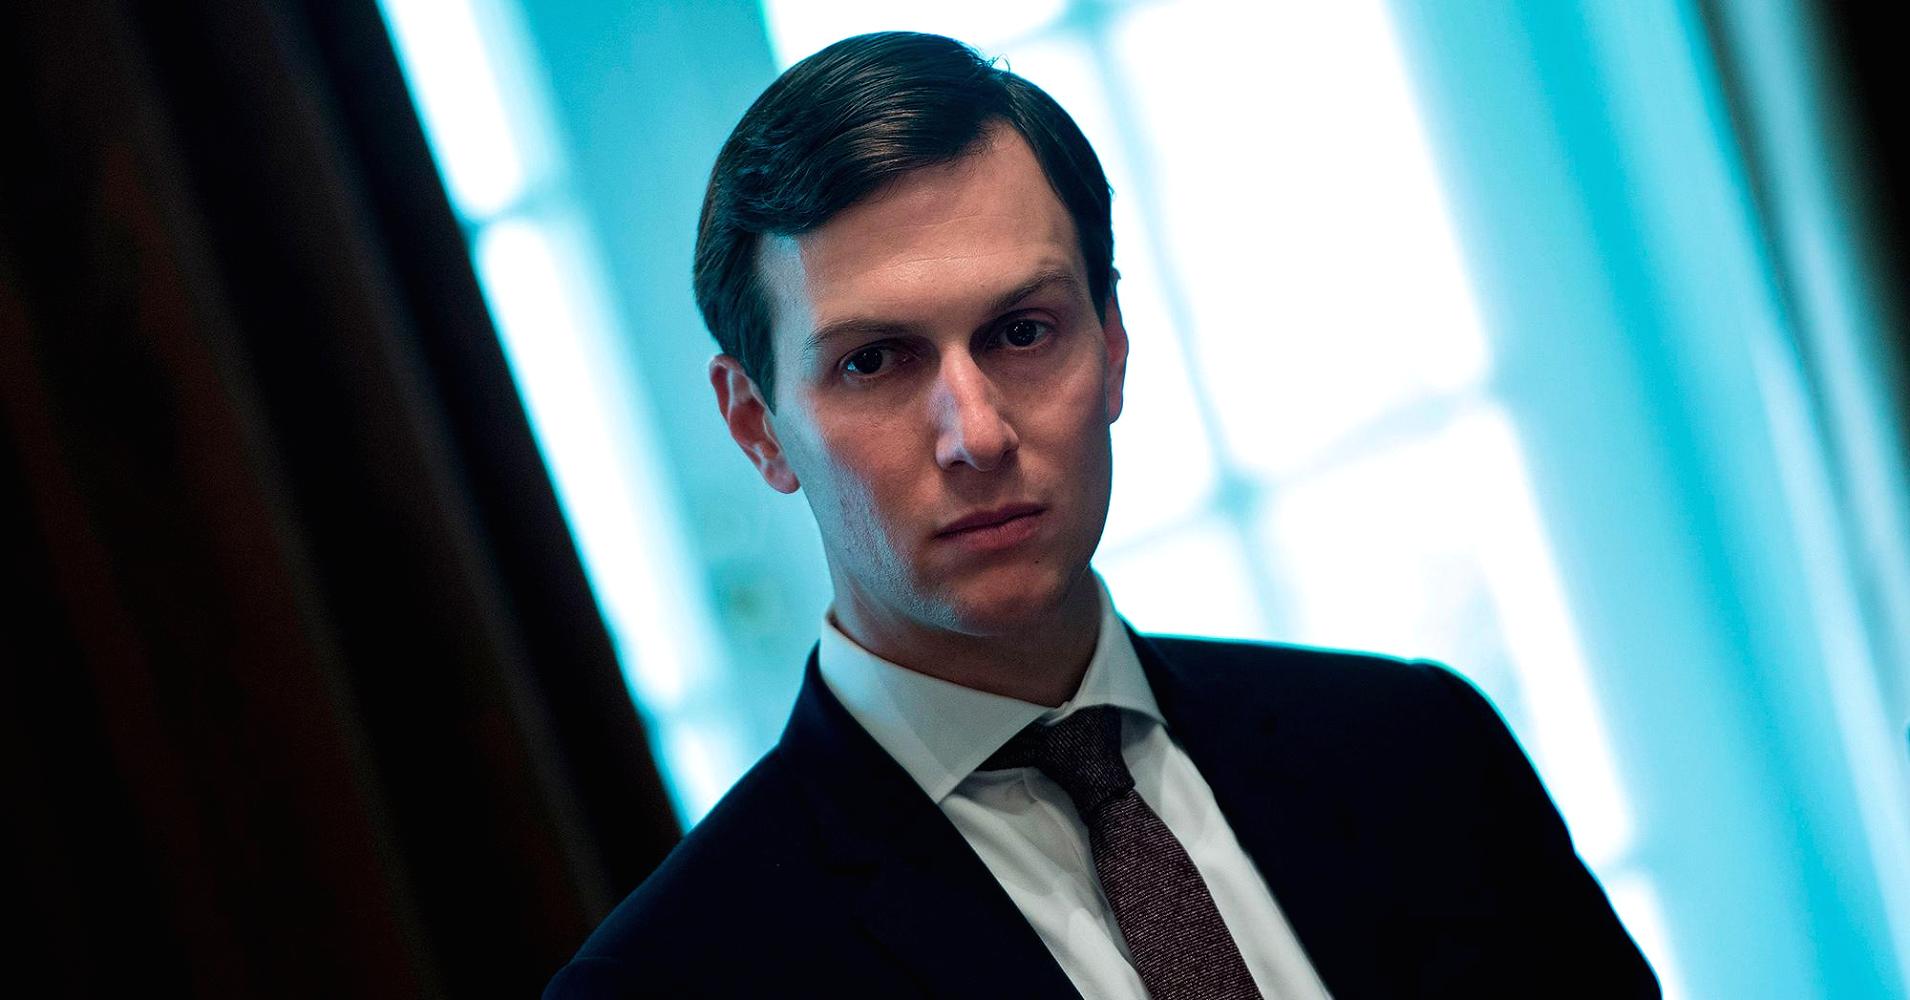 Bank of Internet, which had been under federal investigation, appears in multiple Kushner deals